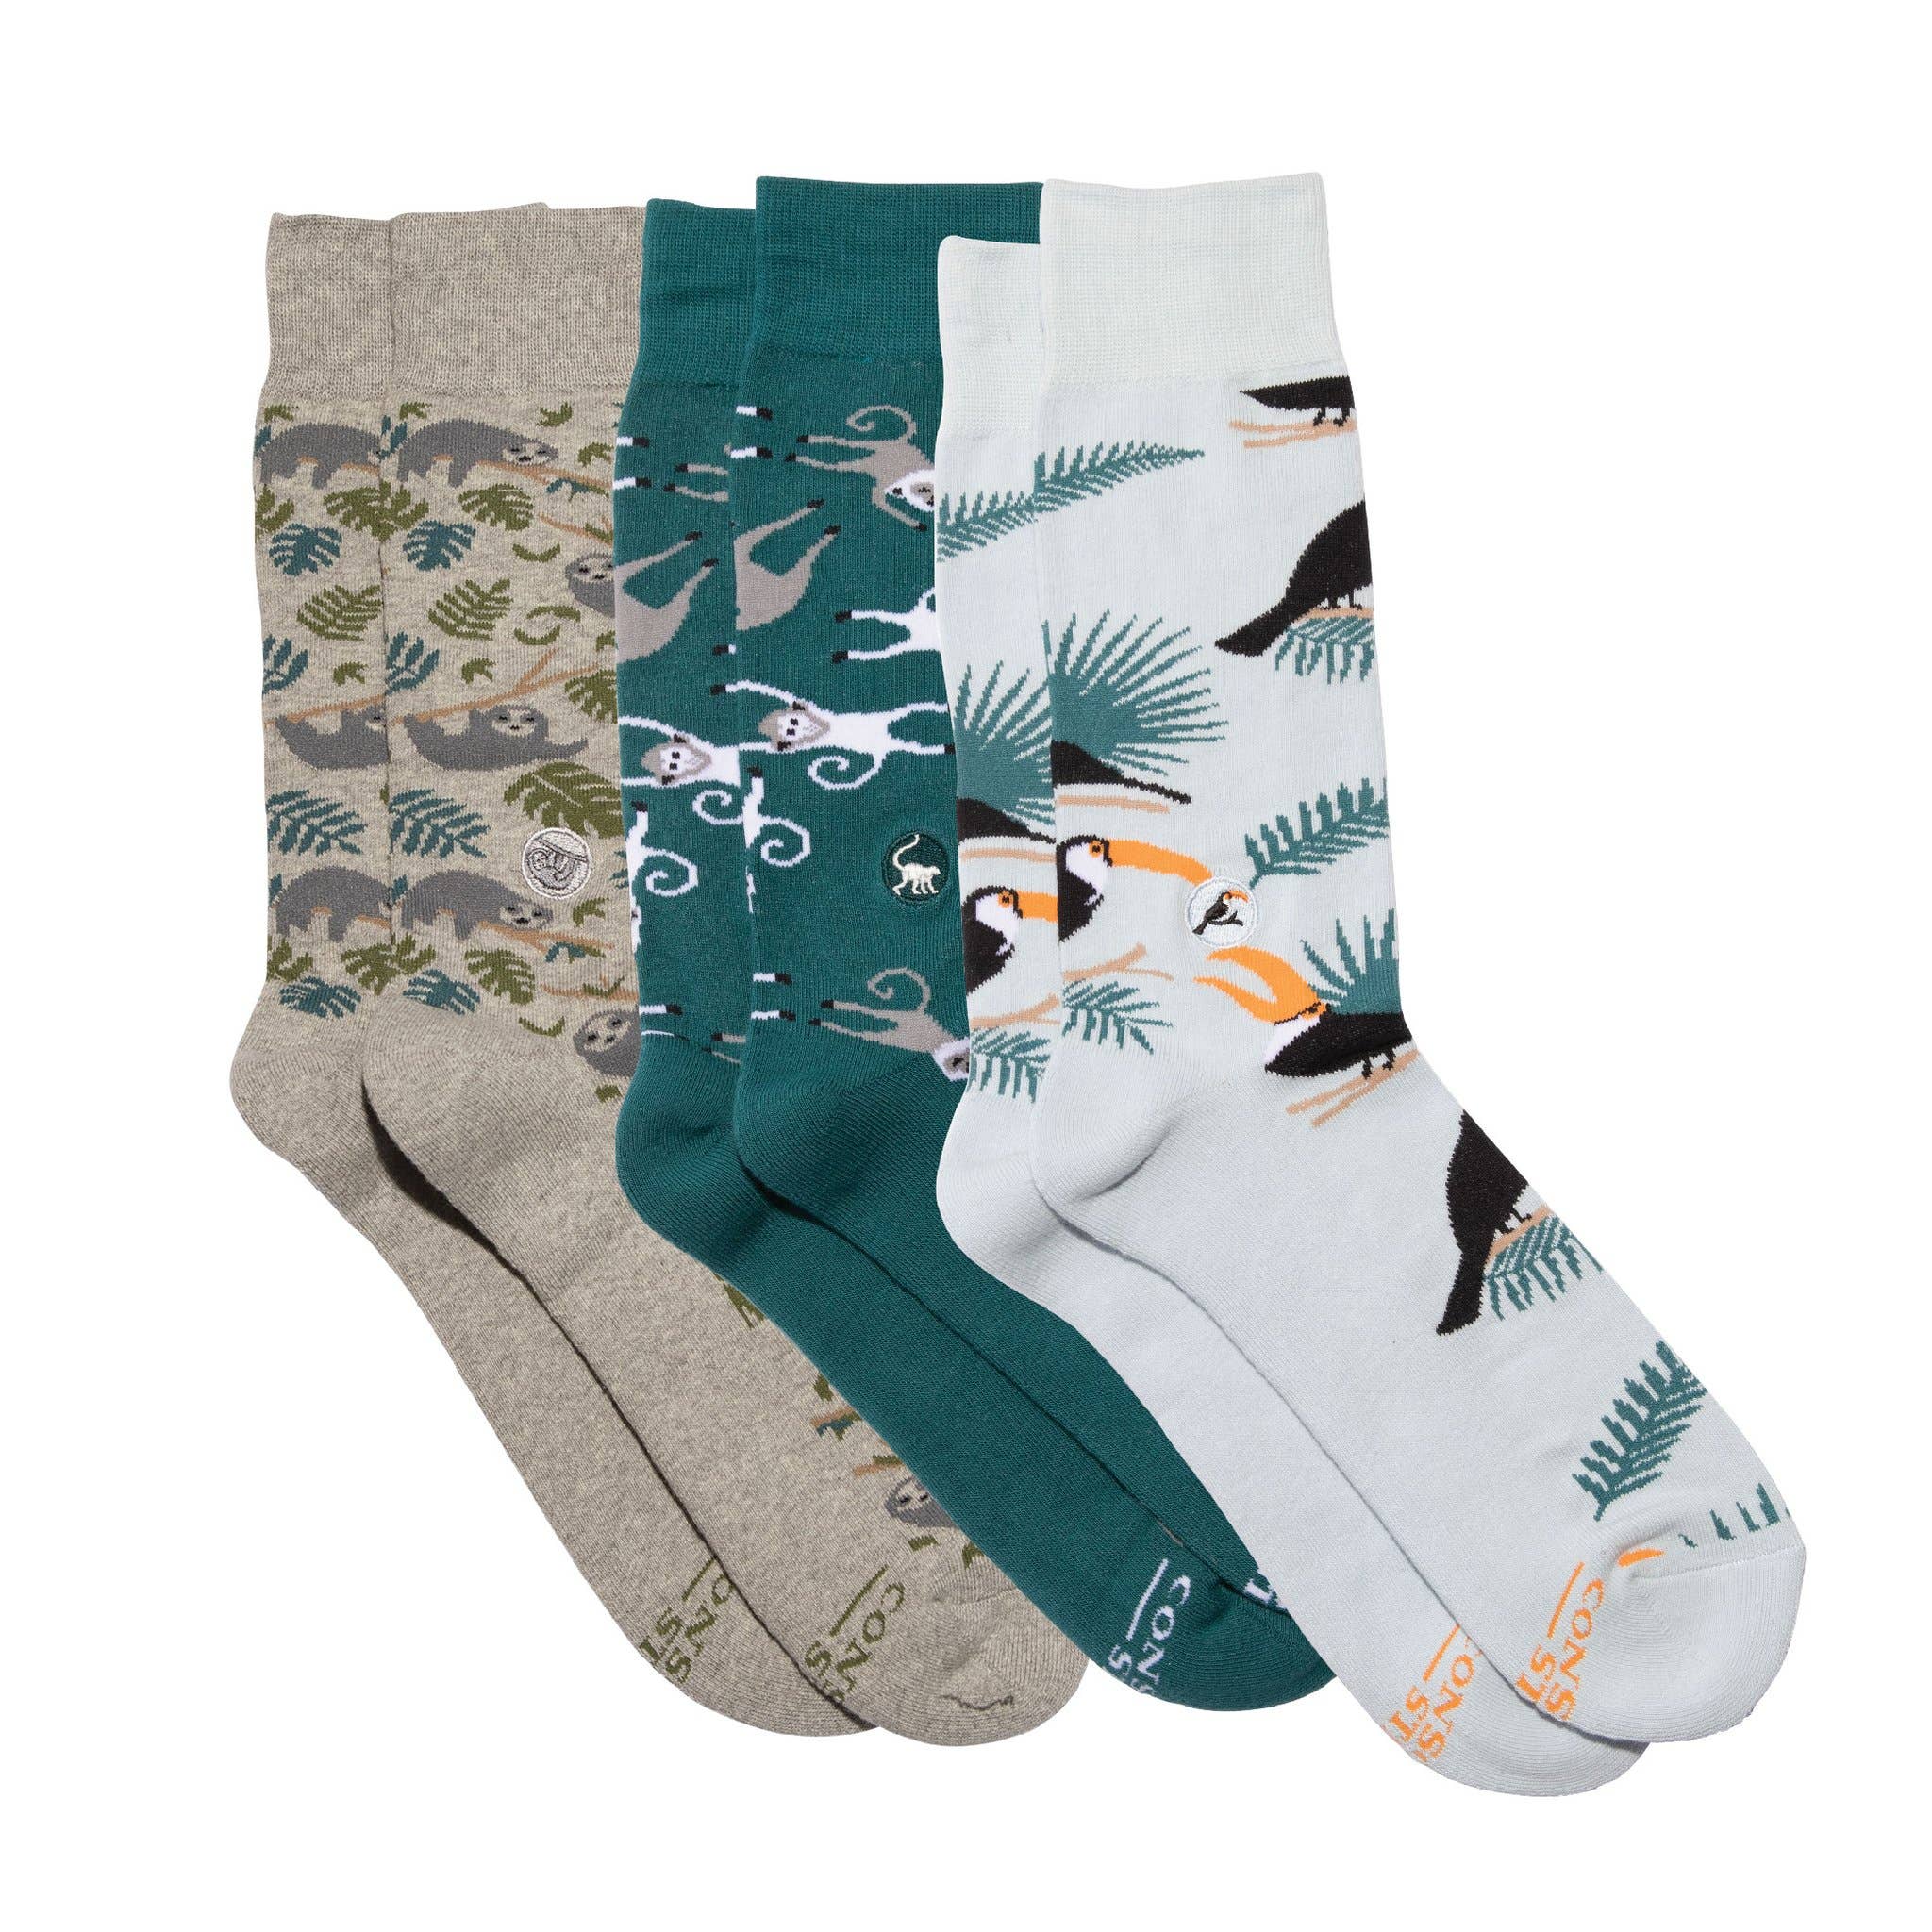 Conscious  Step Boxed Set Socks That Protect Rainforests